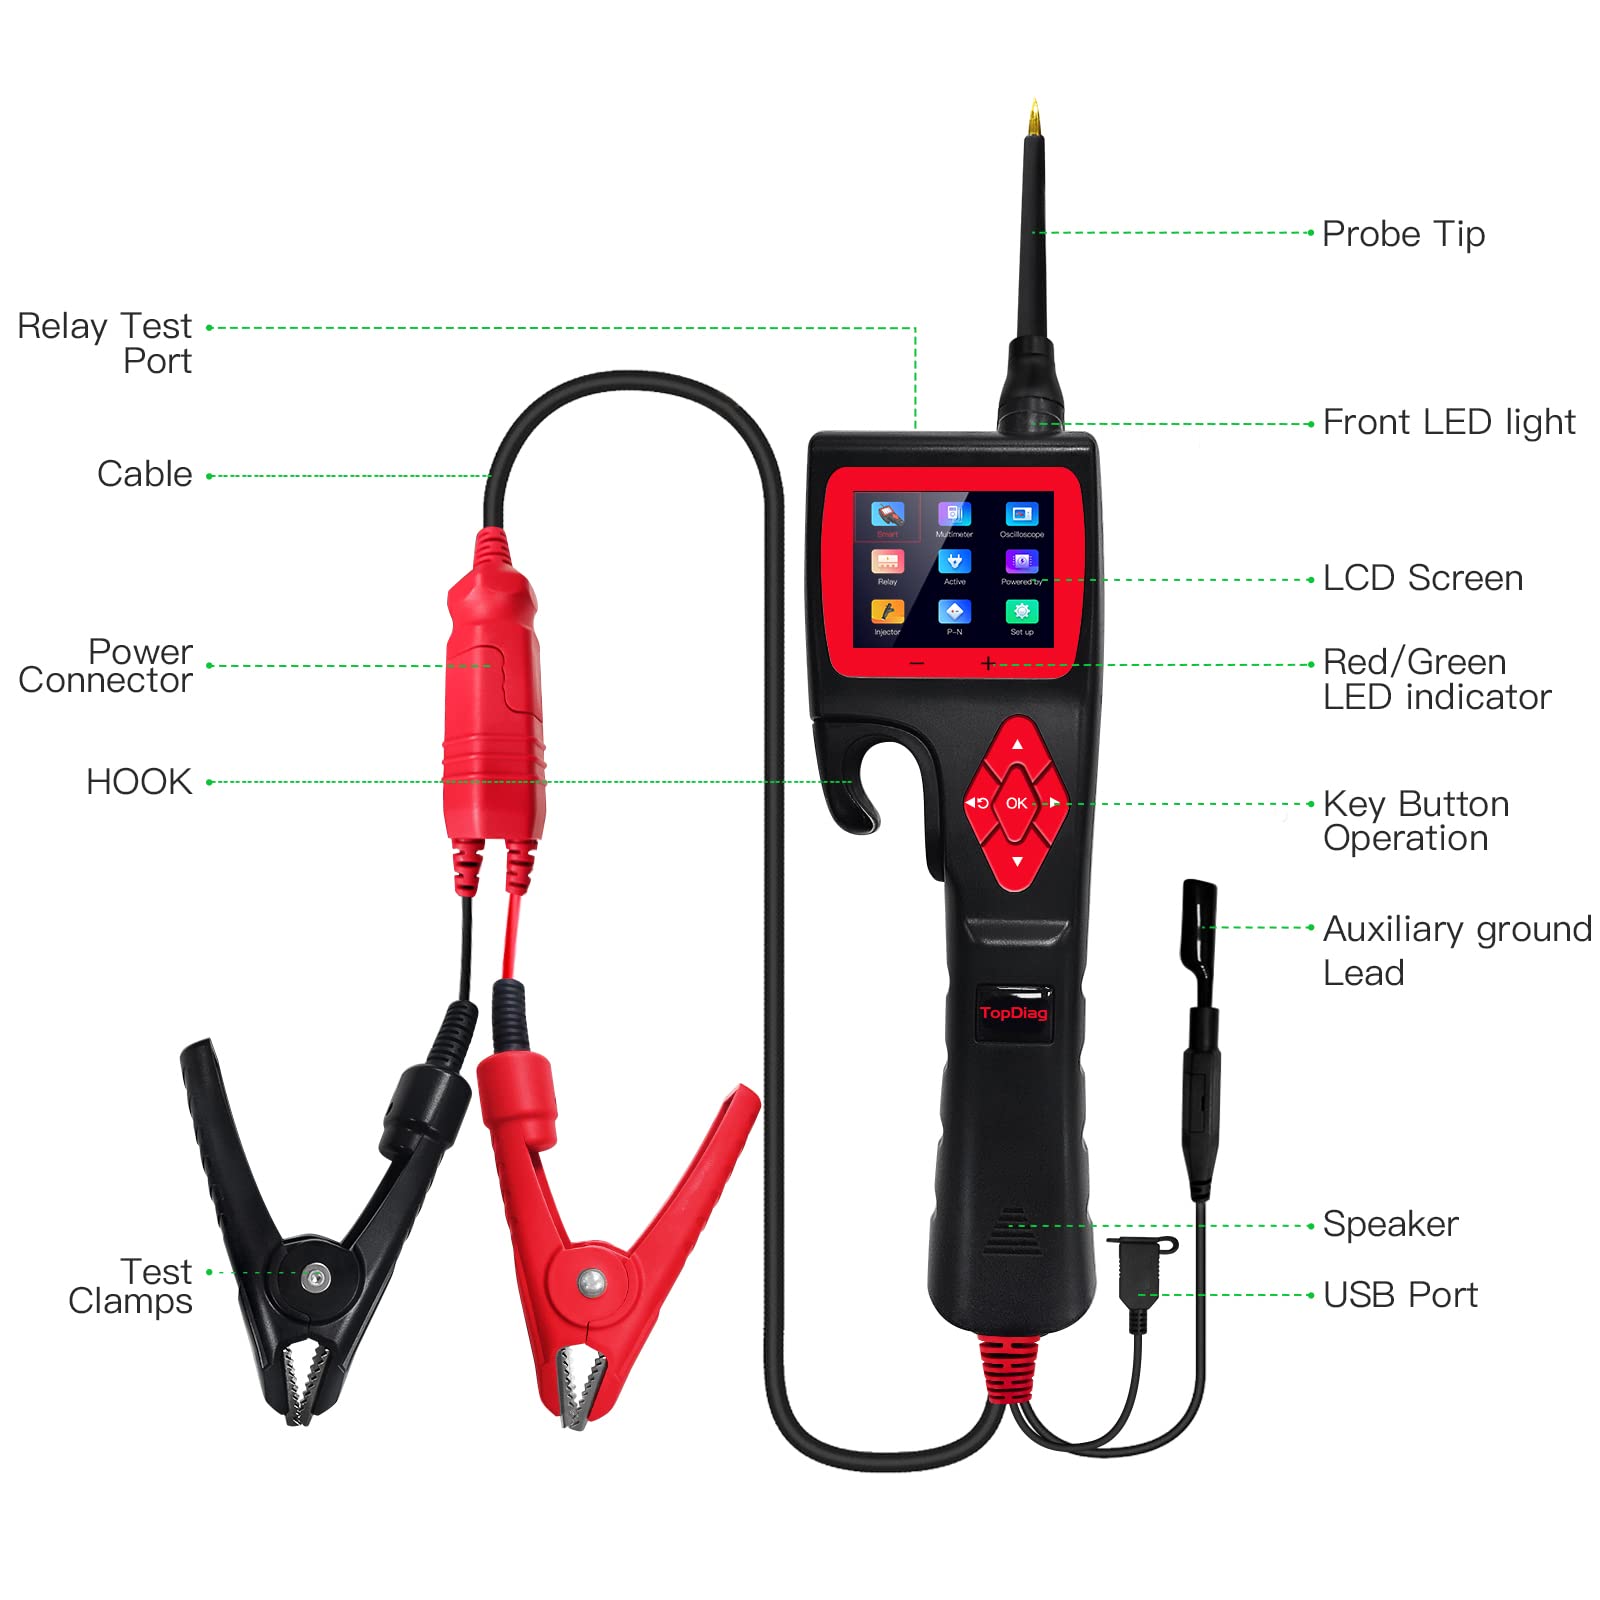 TopDiag P200 Car Circuit Tester with Oscilloscope, 20FT Cable - Tests Voltage, Continuity, Components